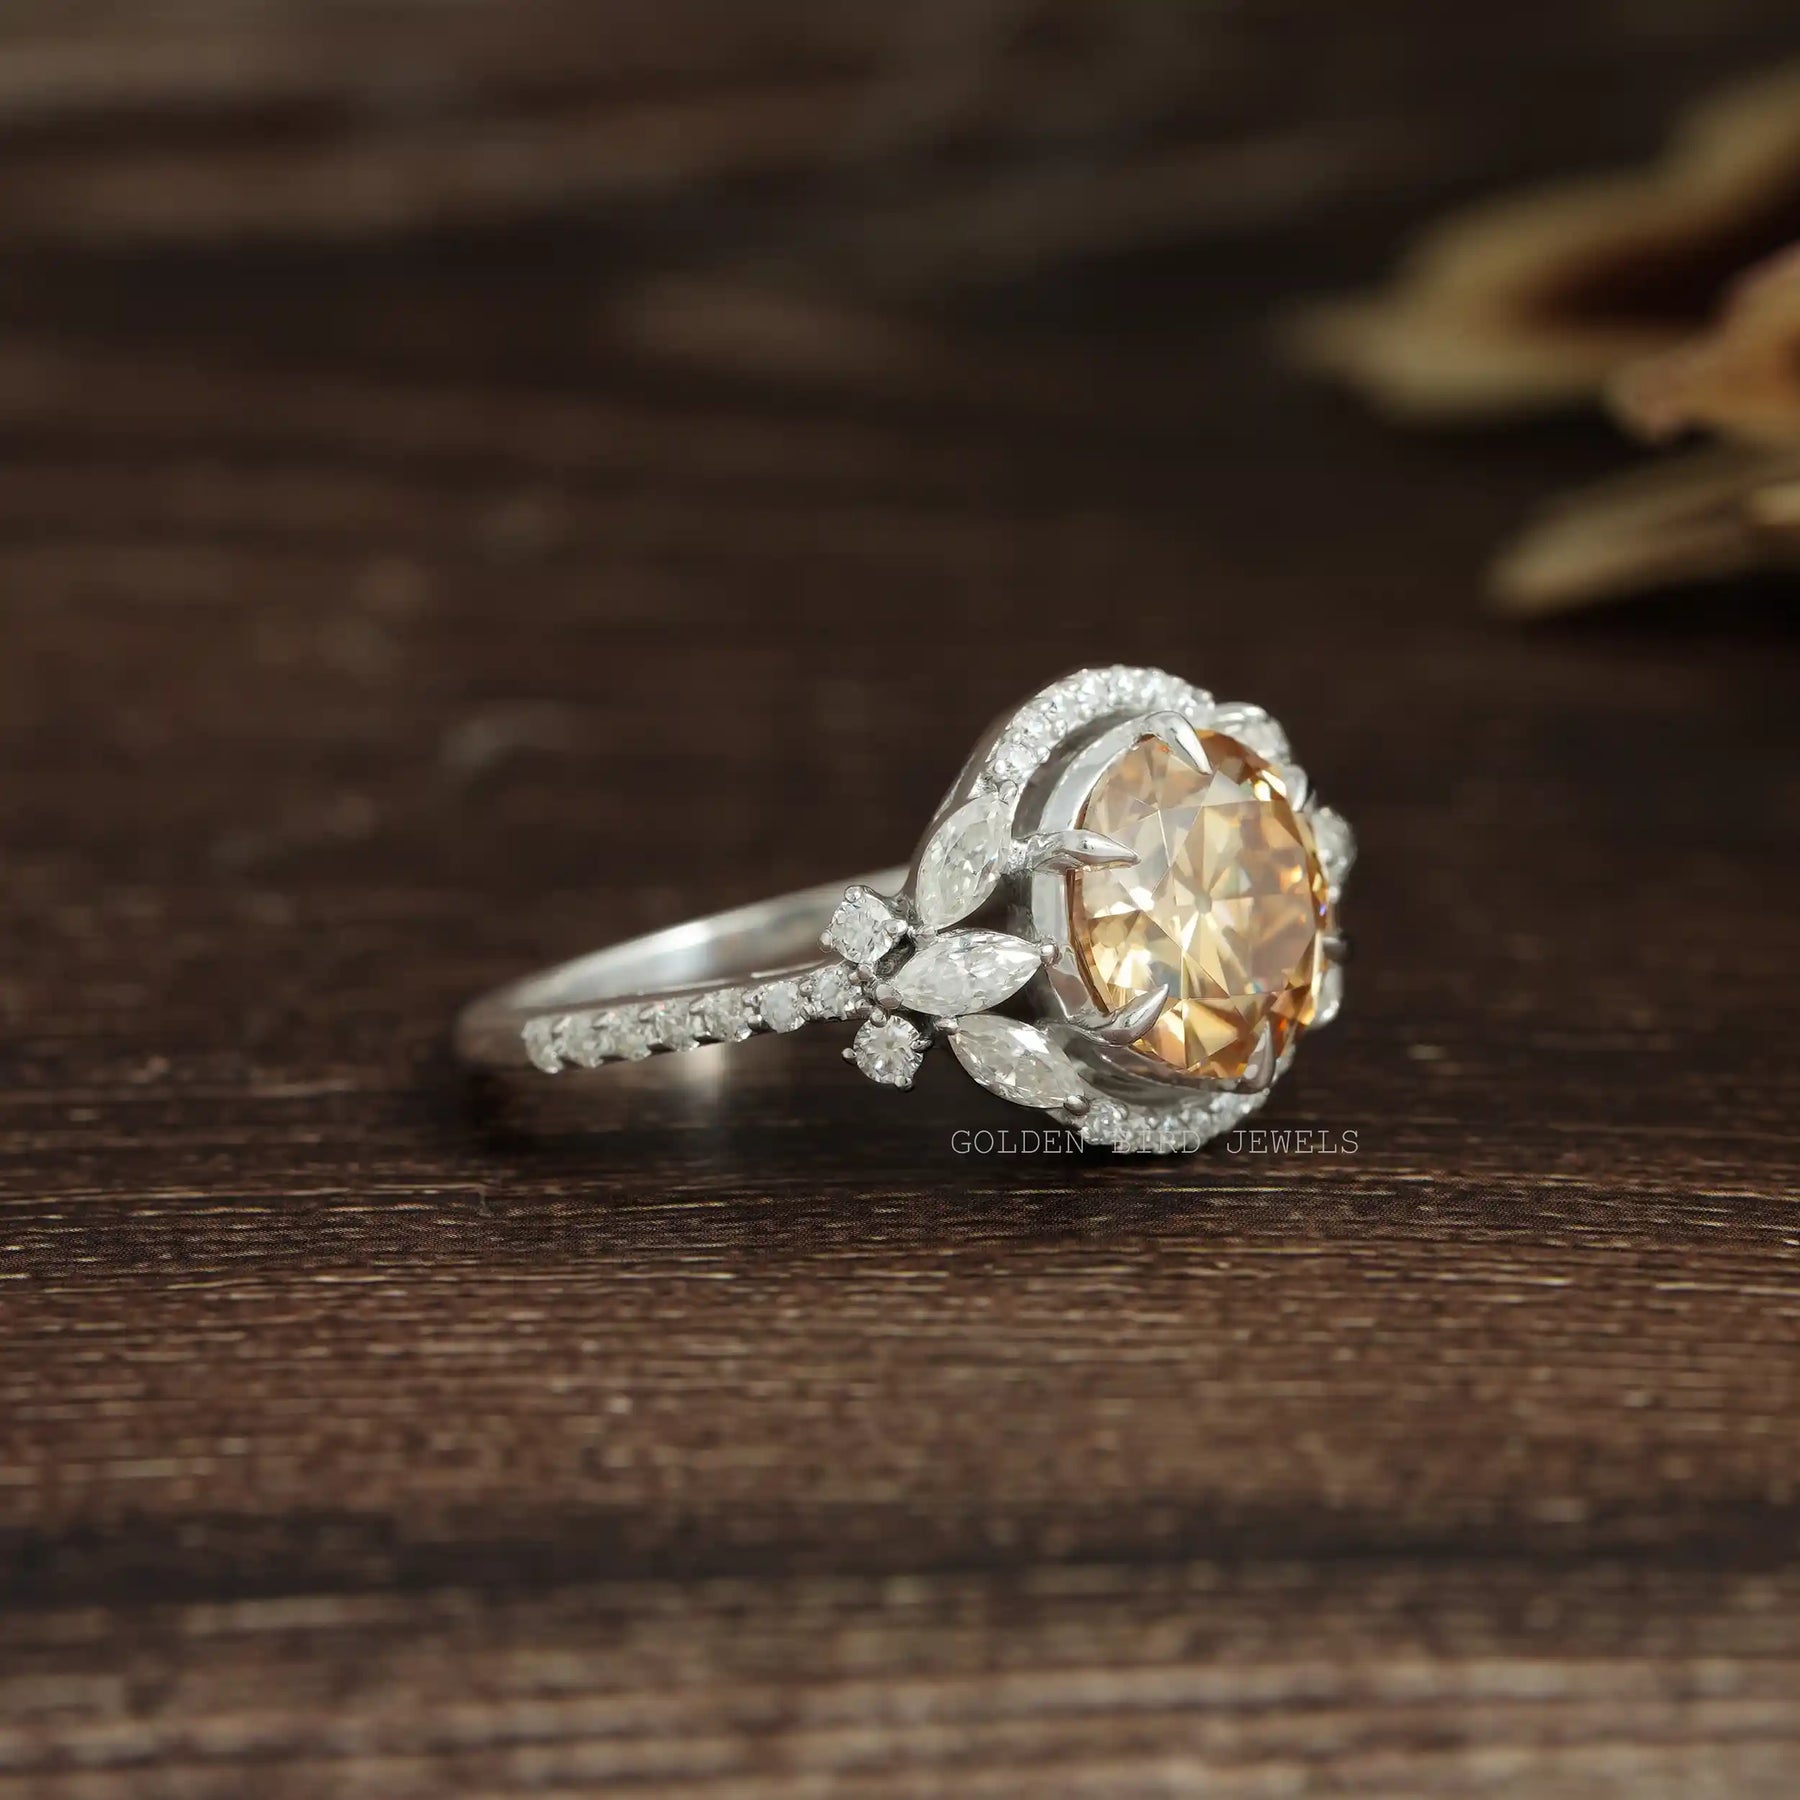 [Cluster moissanite round cut halo ring with VVS clarity moissanite]-[Golden Bird Jewels]